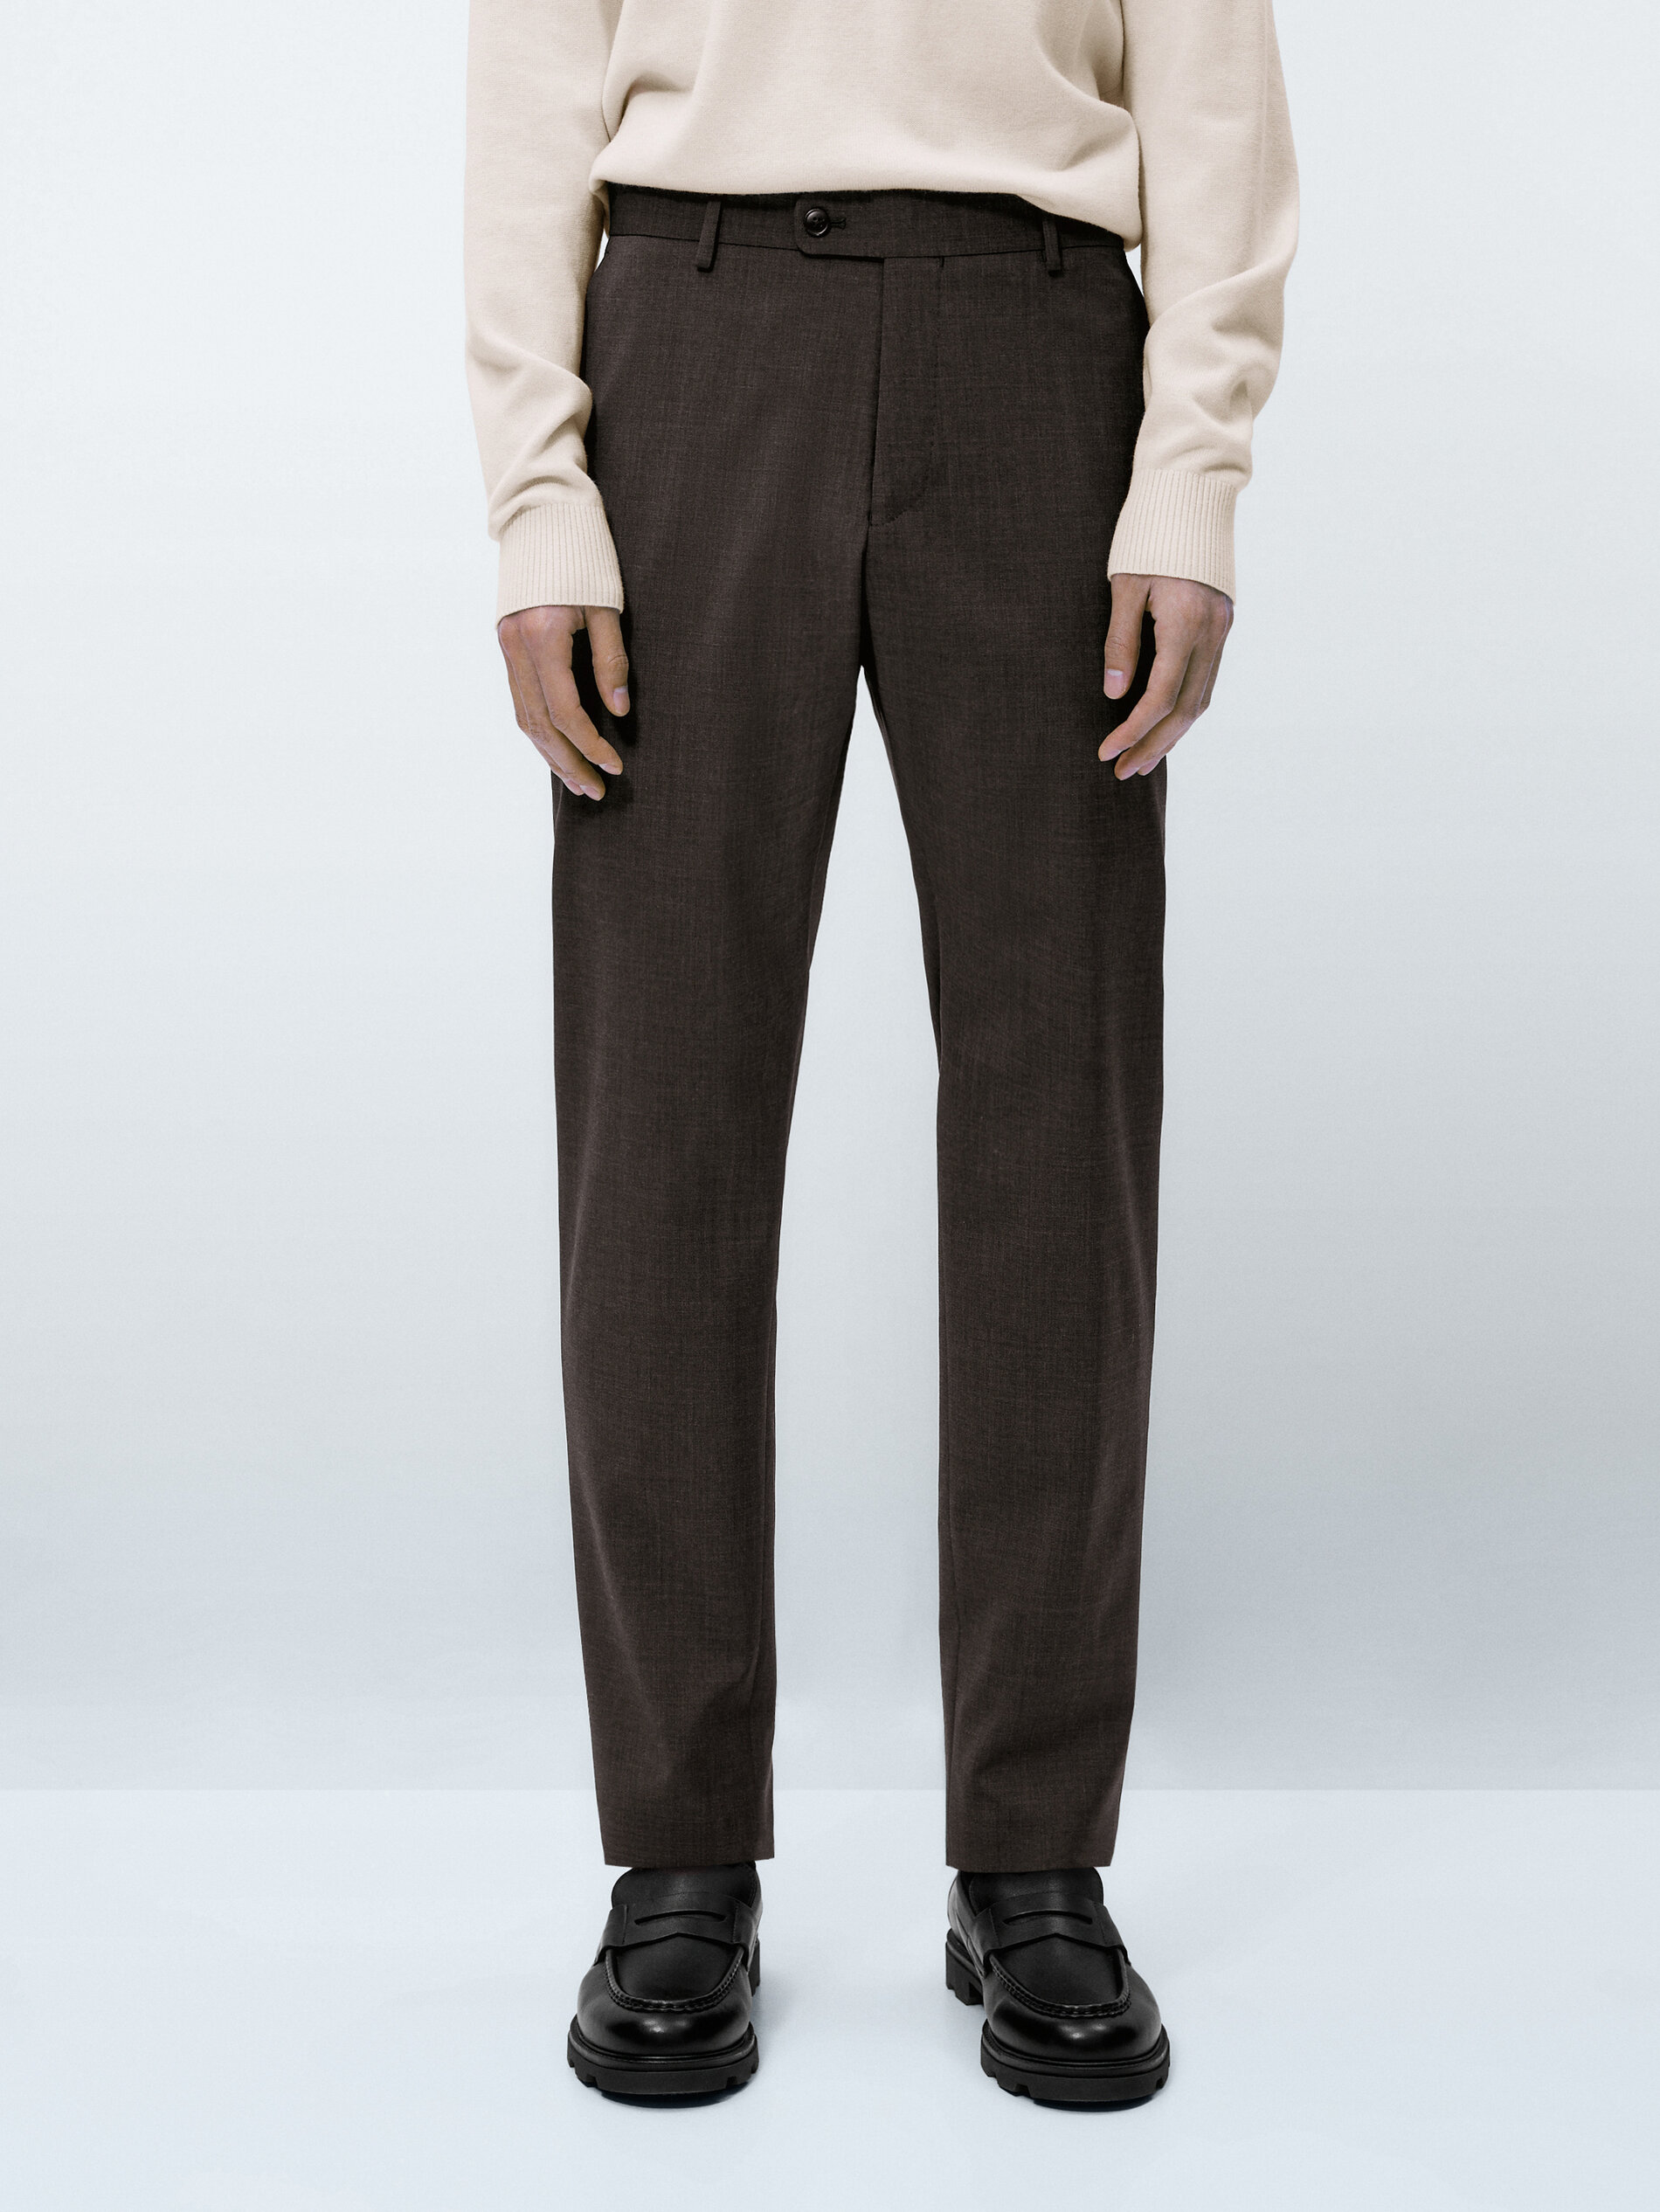 Buy The Alloy Formal and casual Pant online for men  Beyours